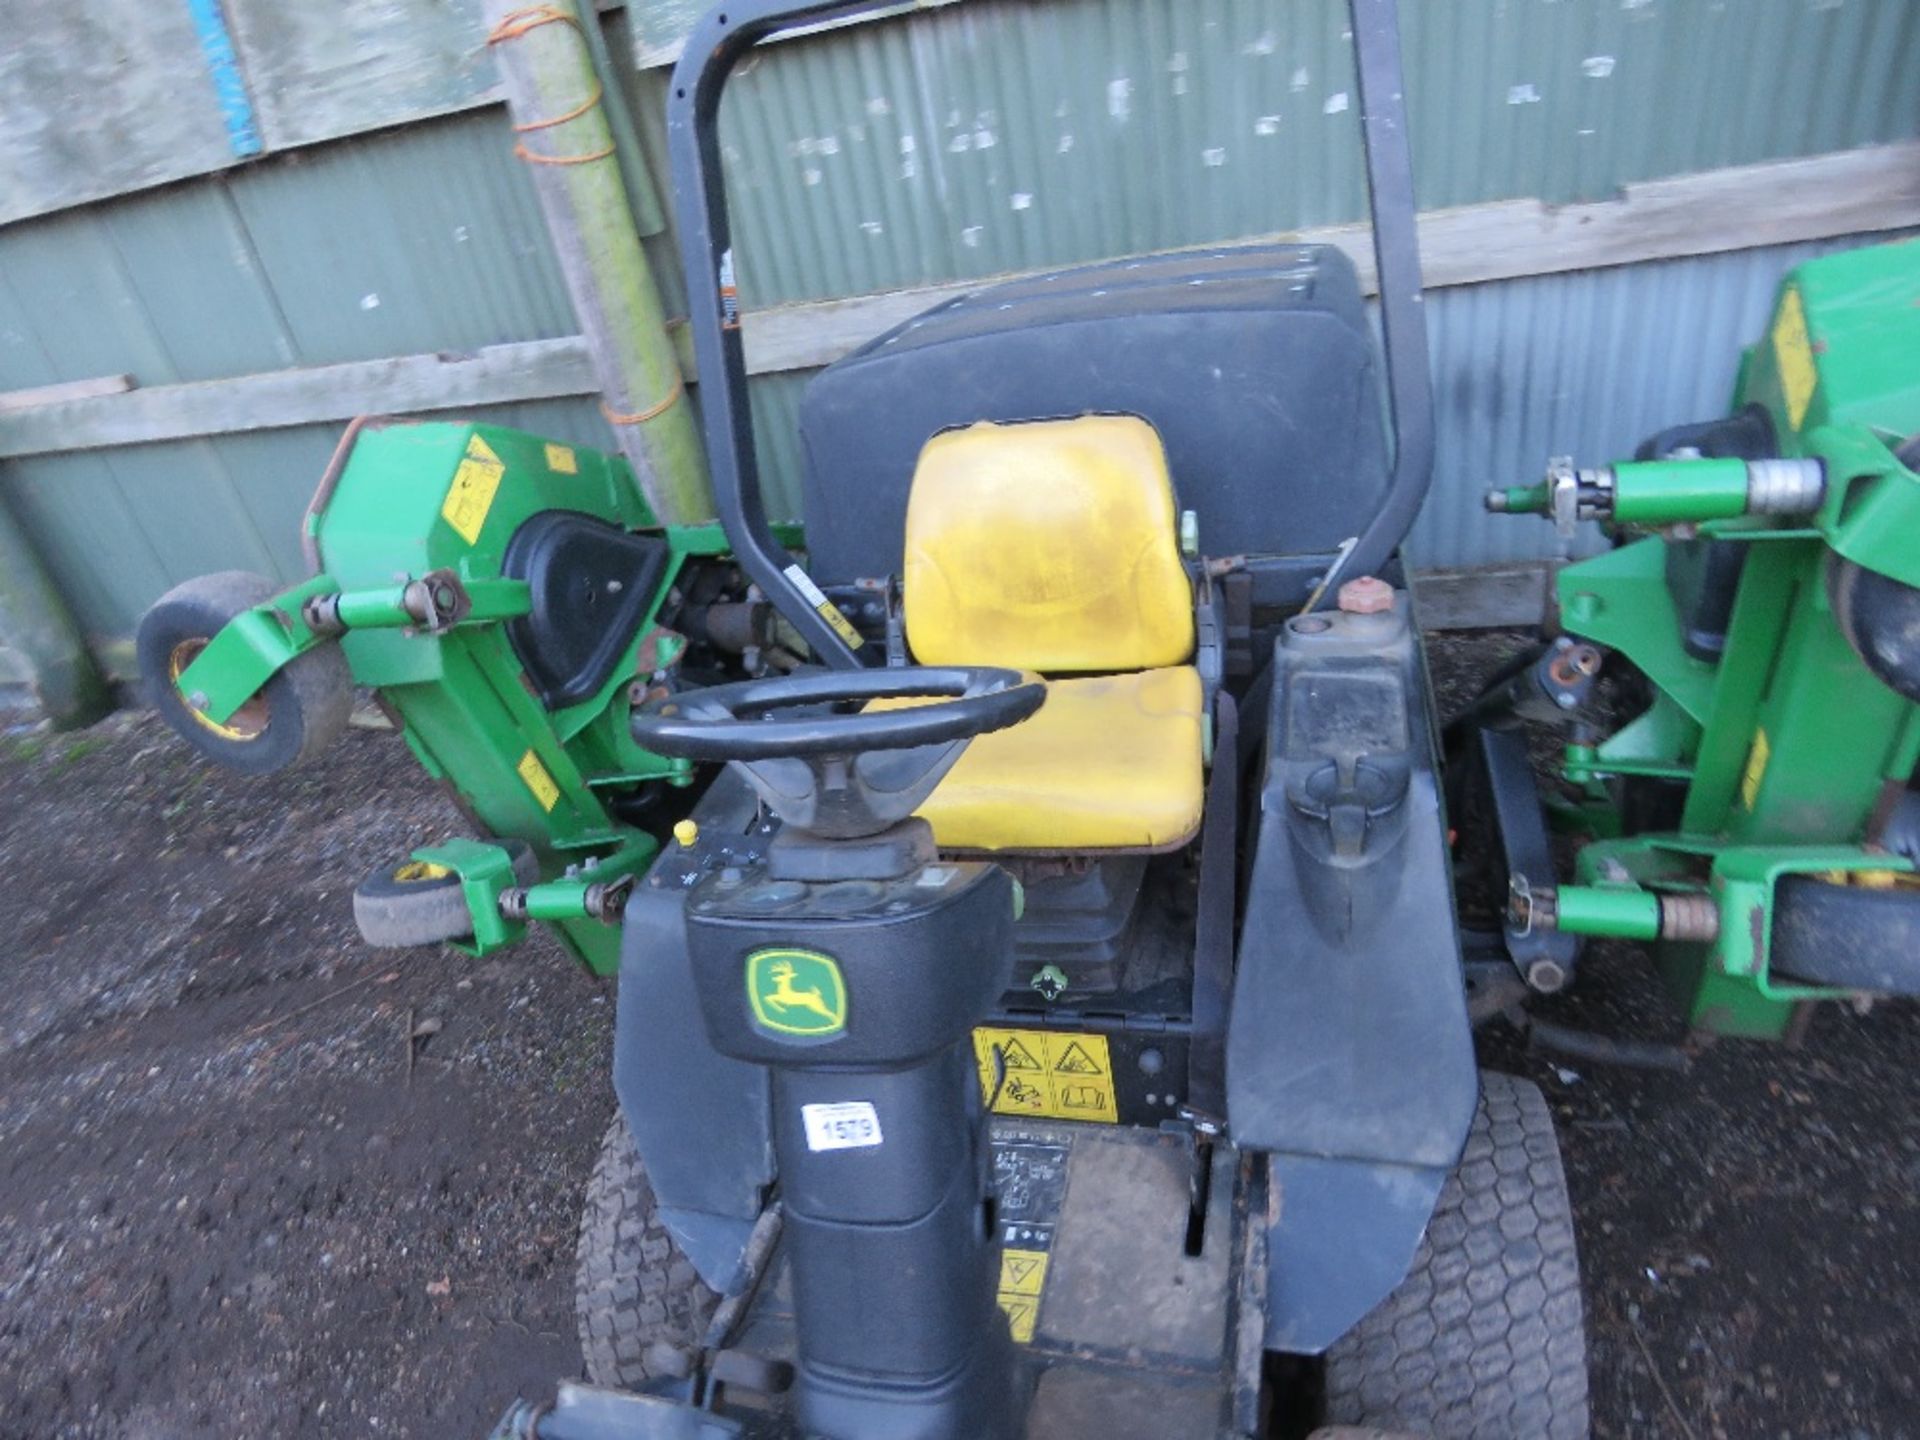 JOHN DEERE WAM 1600T 4 WHEEL DRIVE BATWING MOWER, YEAR 2008 APPROX. 2931 REC HOURS. WHEN TESTED WAS - Image 5 of 10